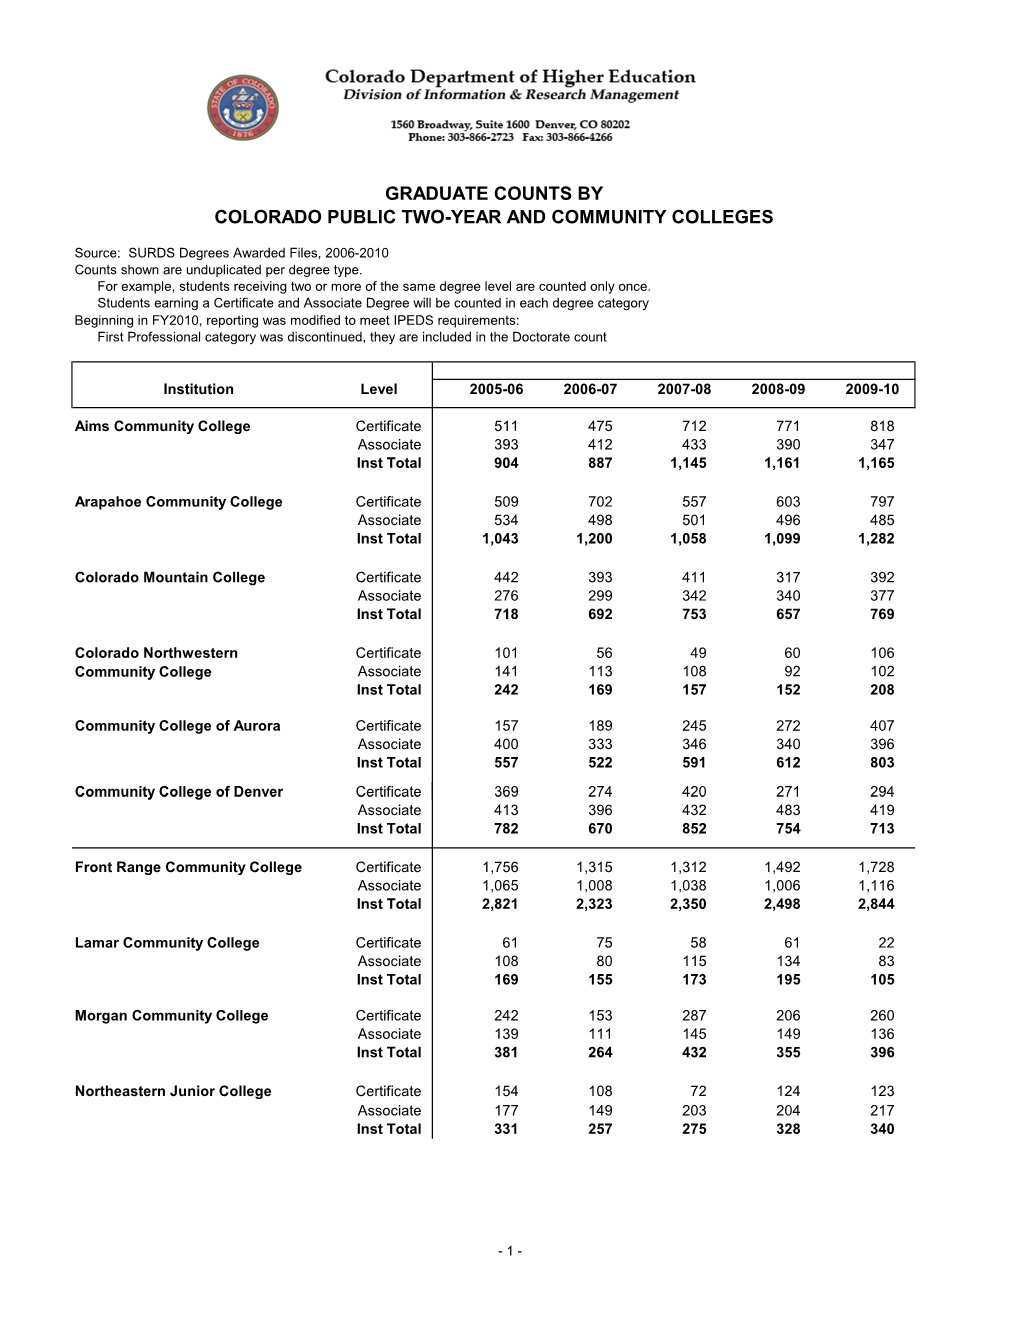 Graduate Counts by Colorado Public Two-Year and Community Colleges